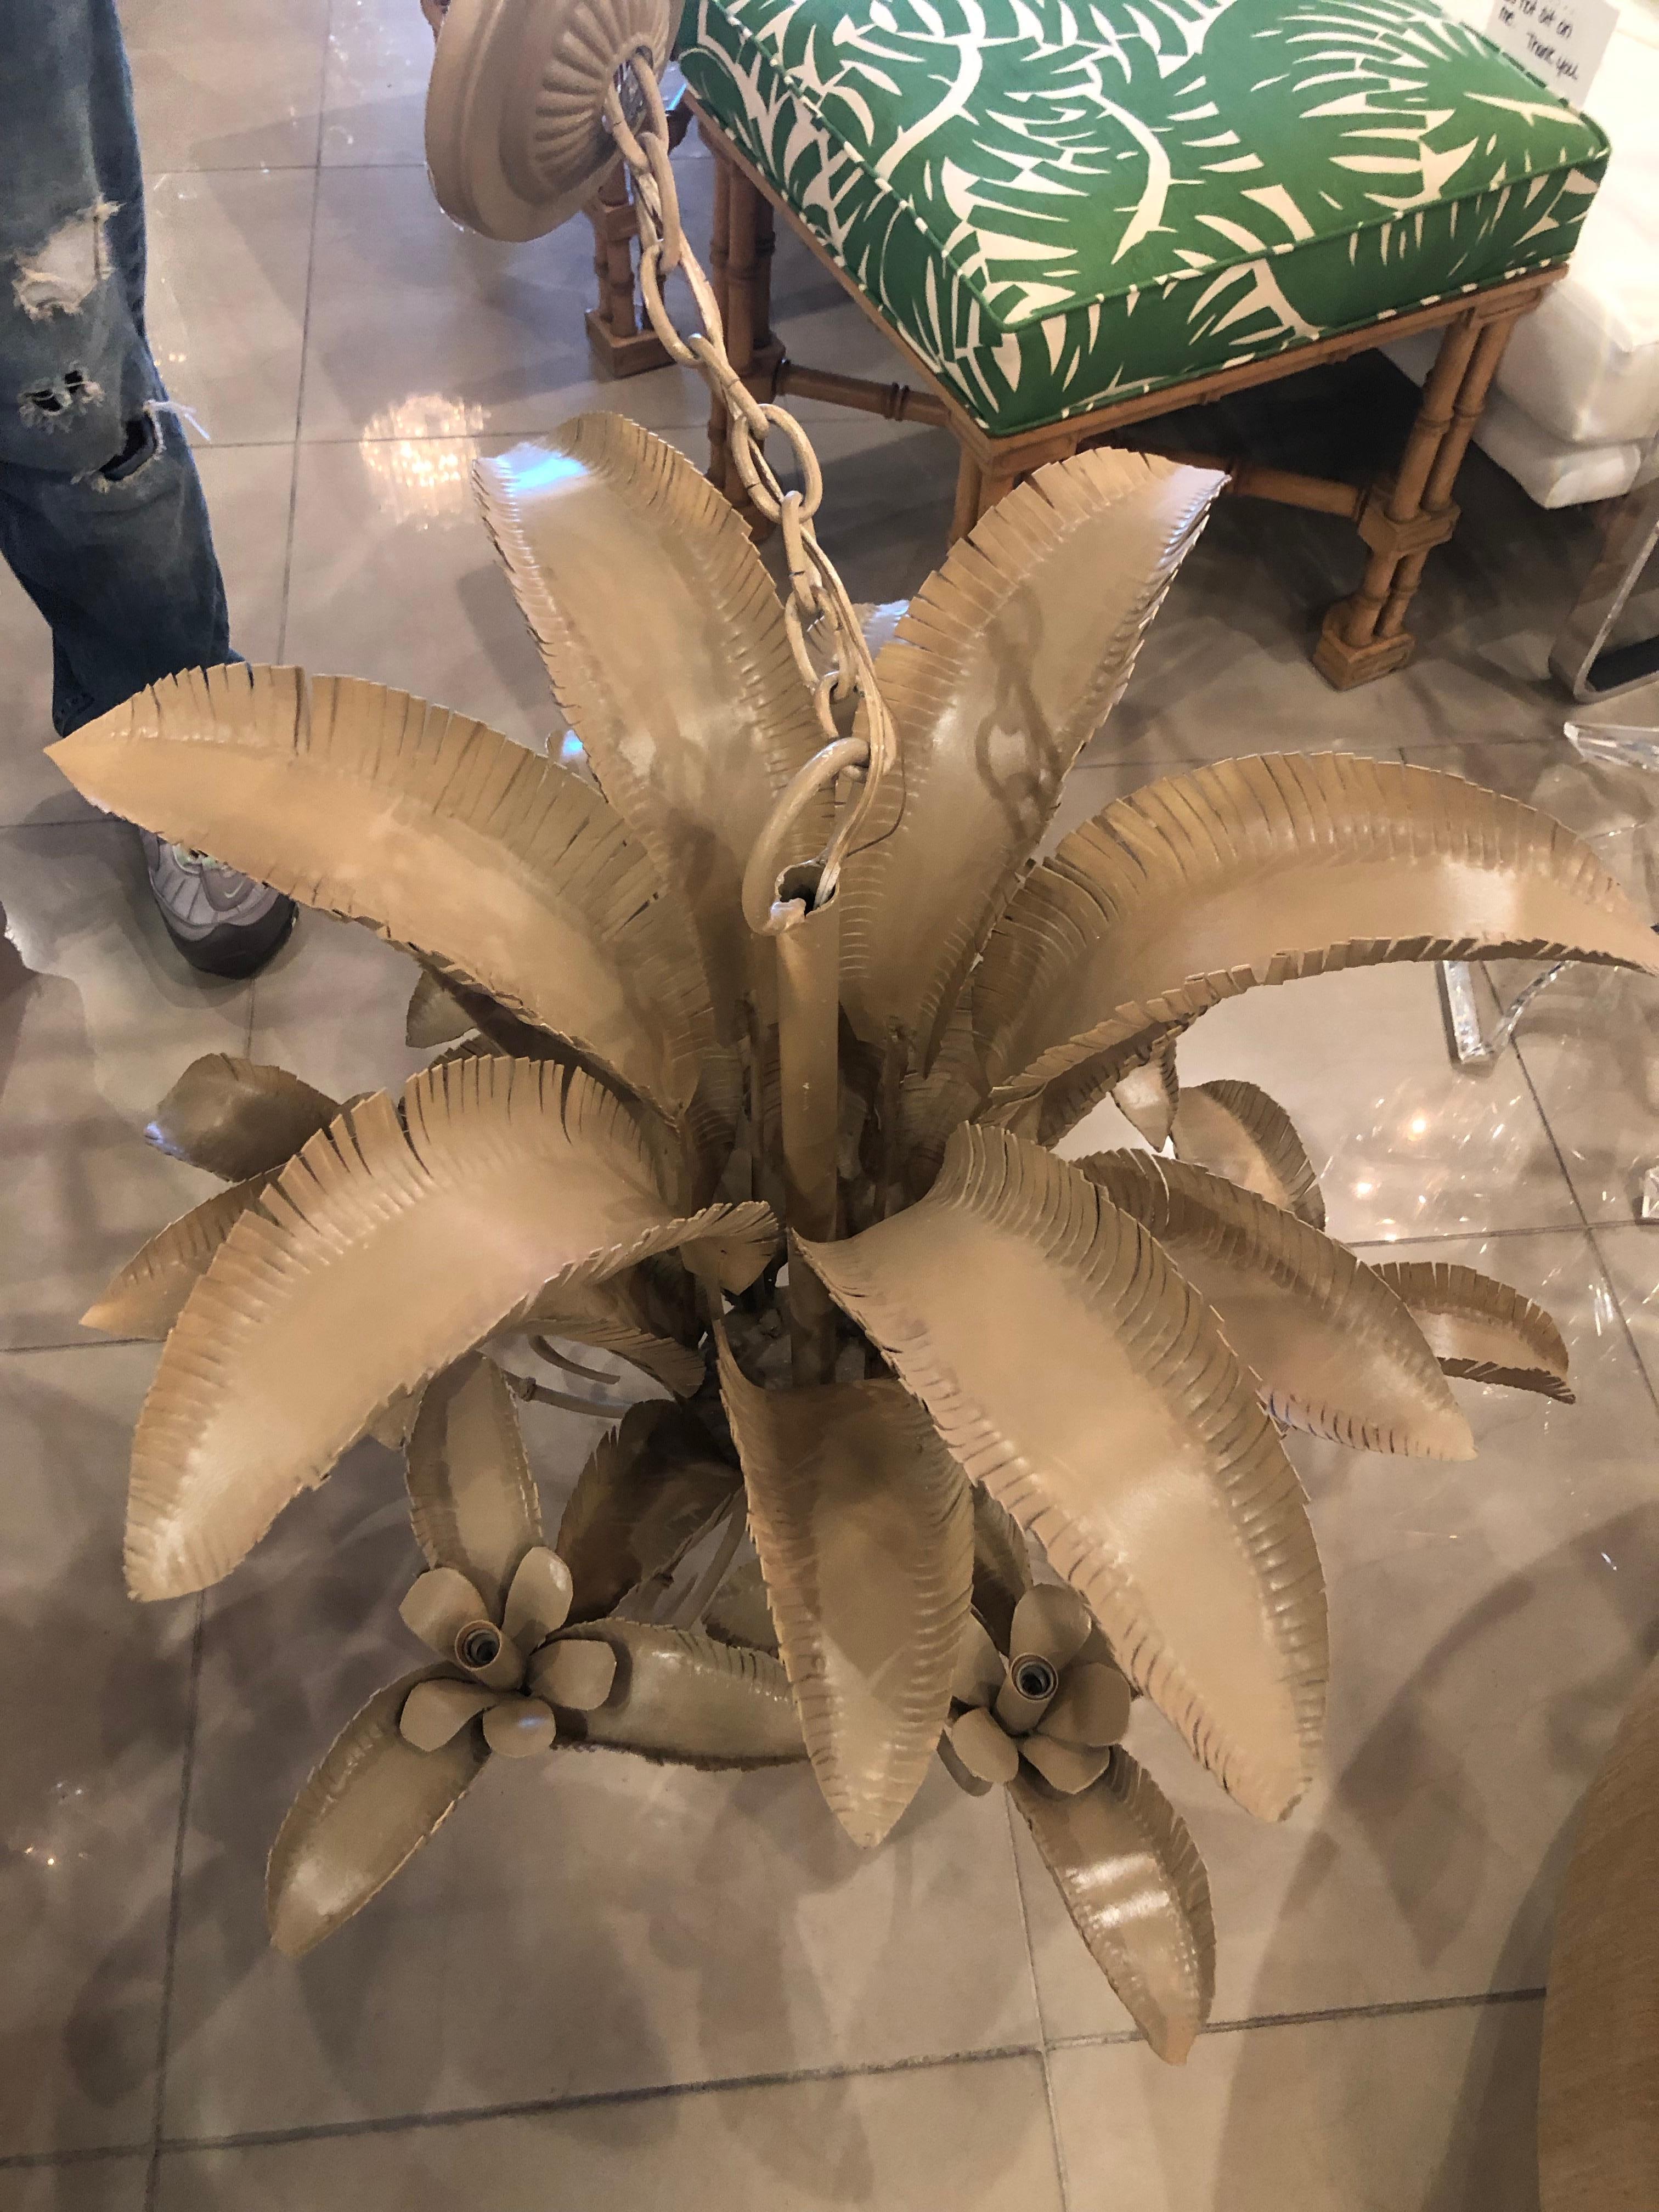 One of the most beautiful palm frond leaf chandeliers I have seen! It’s so full of leaves, layer after layer. The arms even have leaves. It’s large and heavy. Holds 6 lights. Comes with original ceiling cap. Color is as found tan.